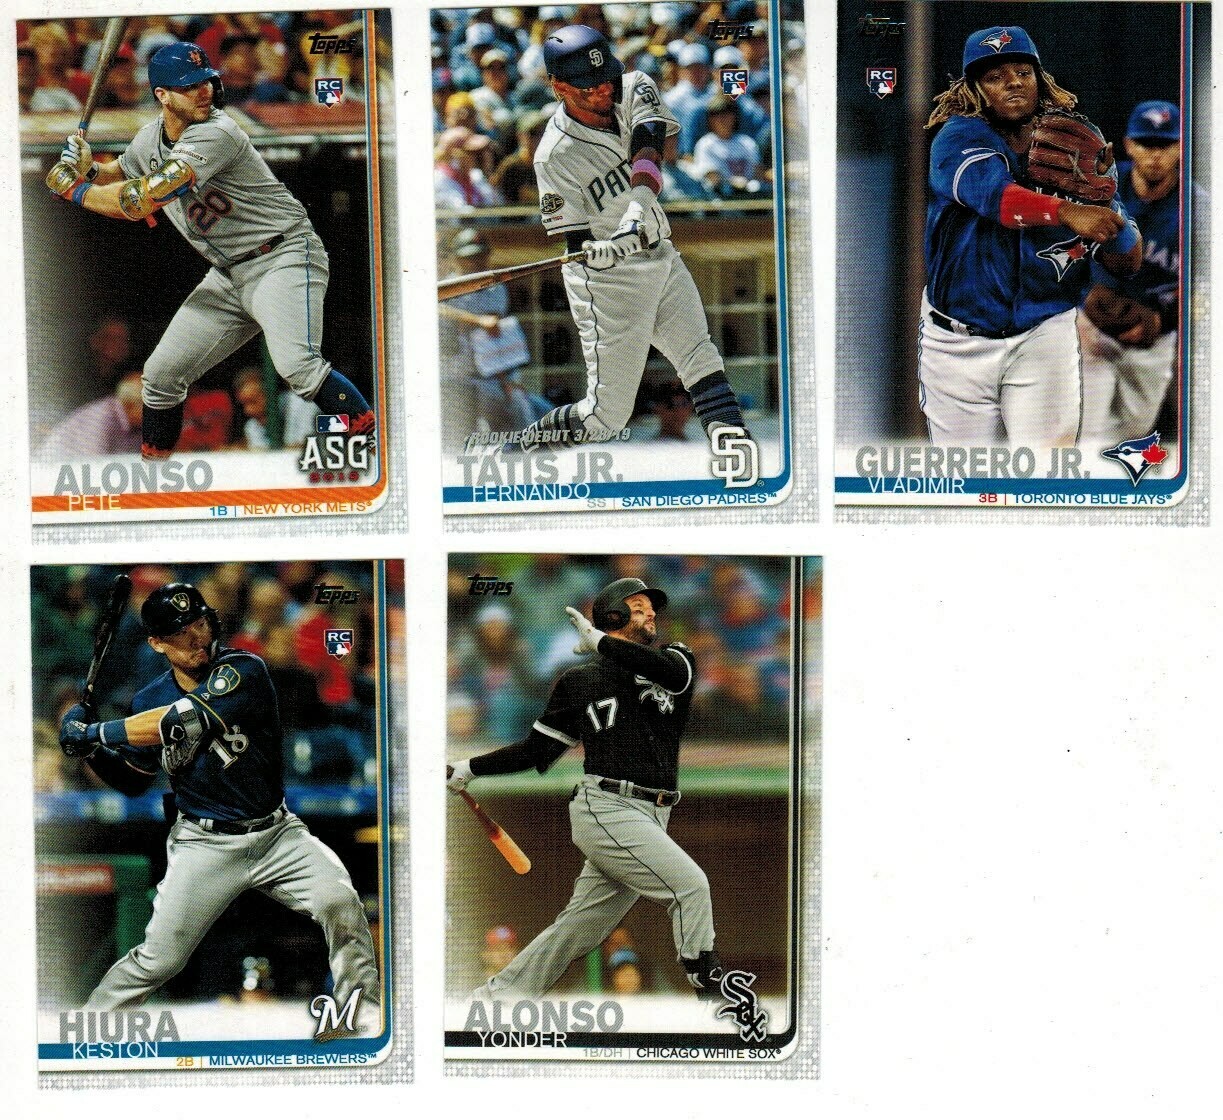 2019 Topps Baseball update set Loaded with Rookies